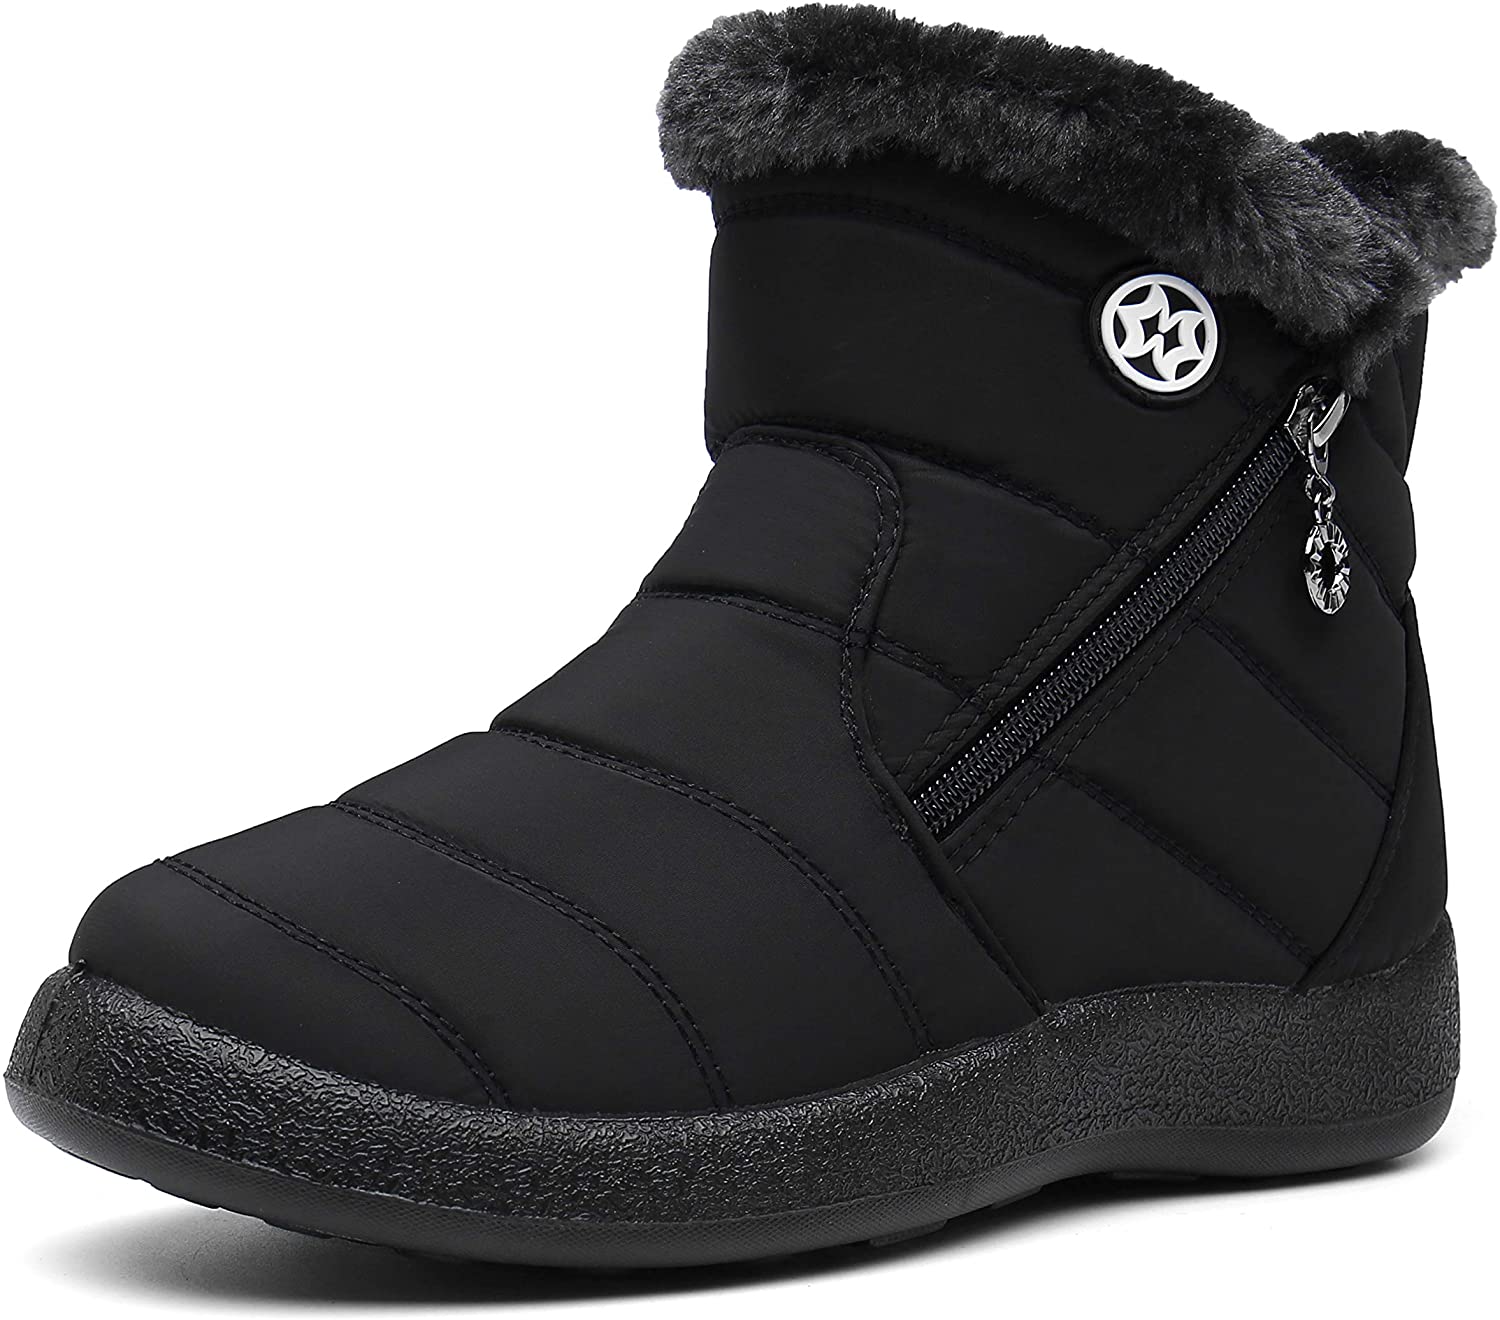 Hsyooes Womens Warm Fur Lined Winter Snow Boots Waterproof Ankle Boots ...